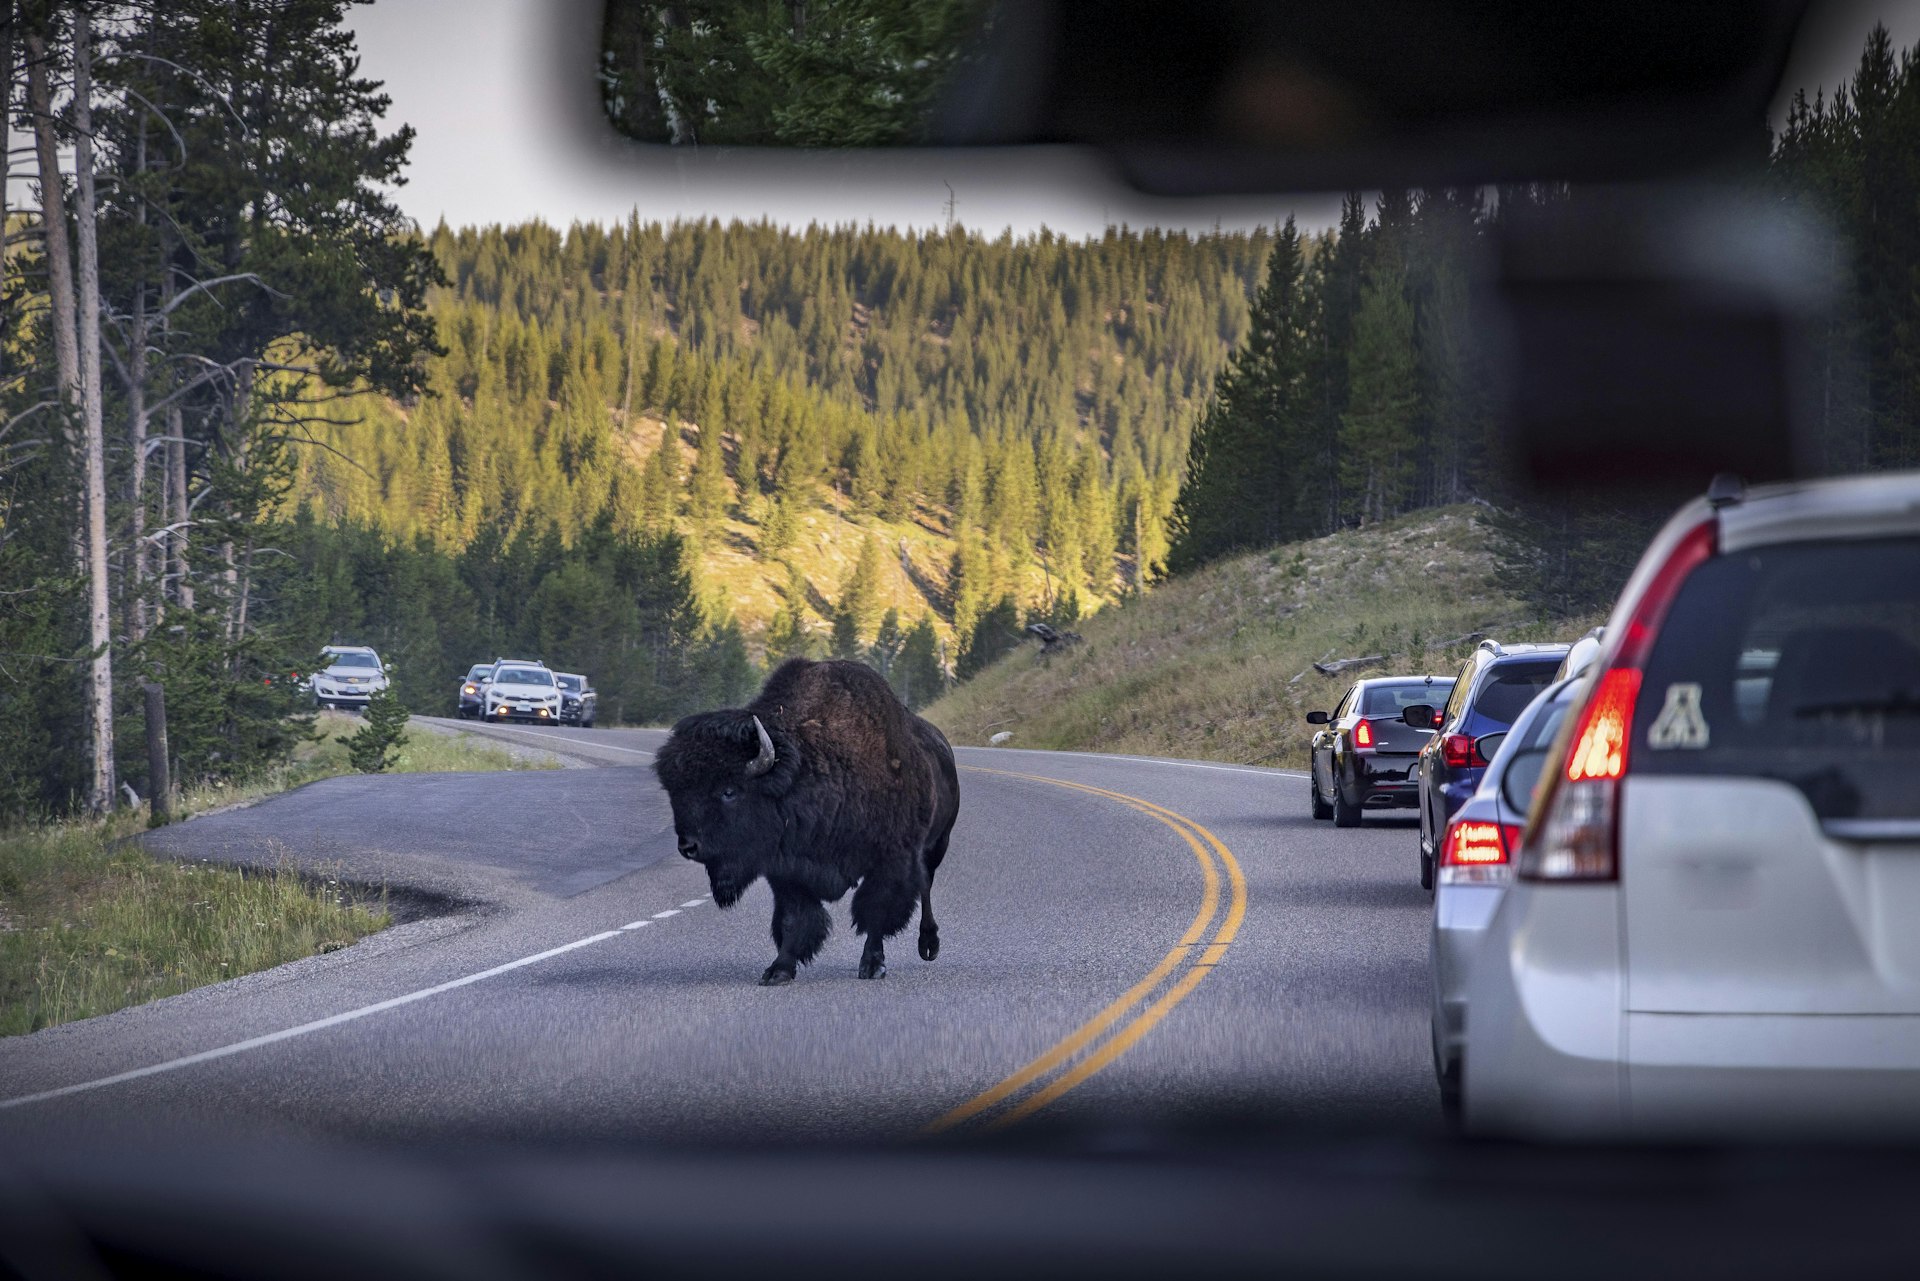 A bison roams through traffic in Yellowstone National Park